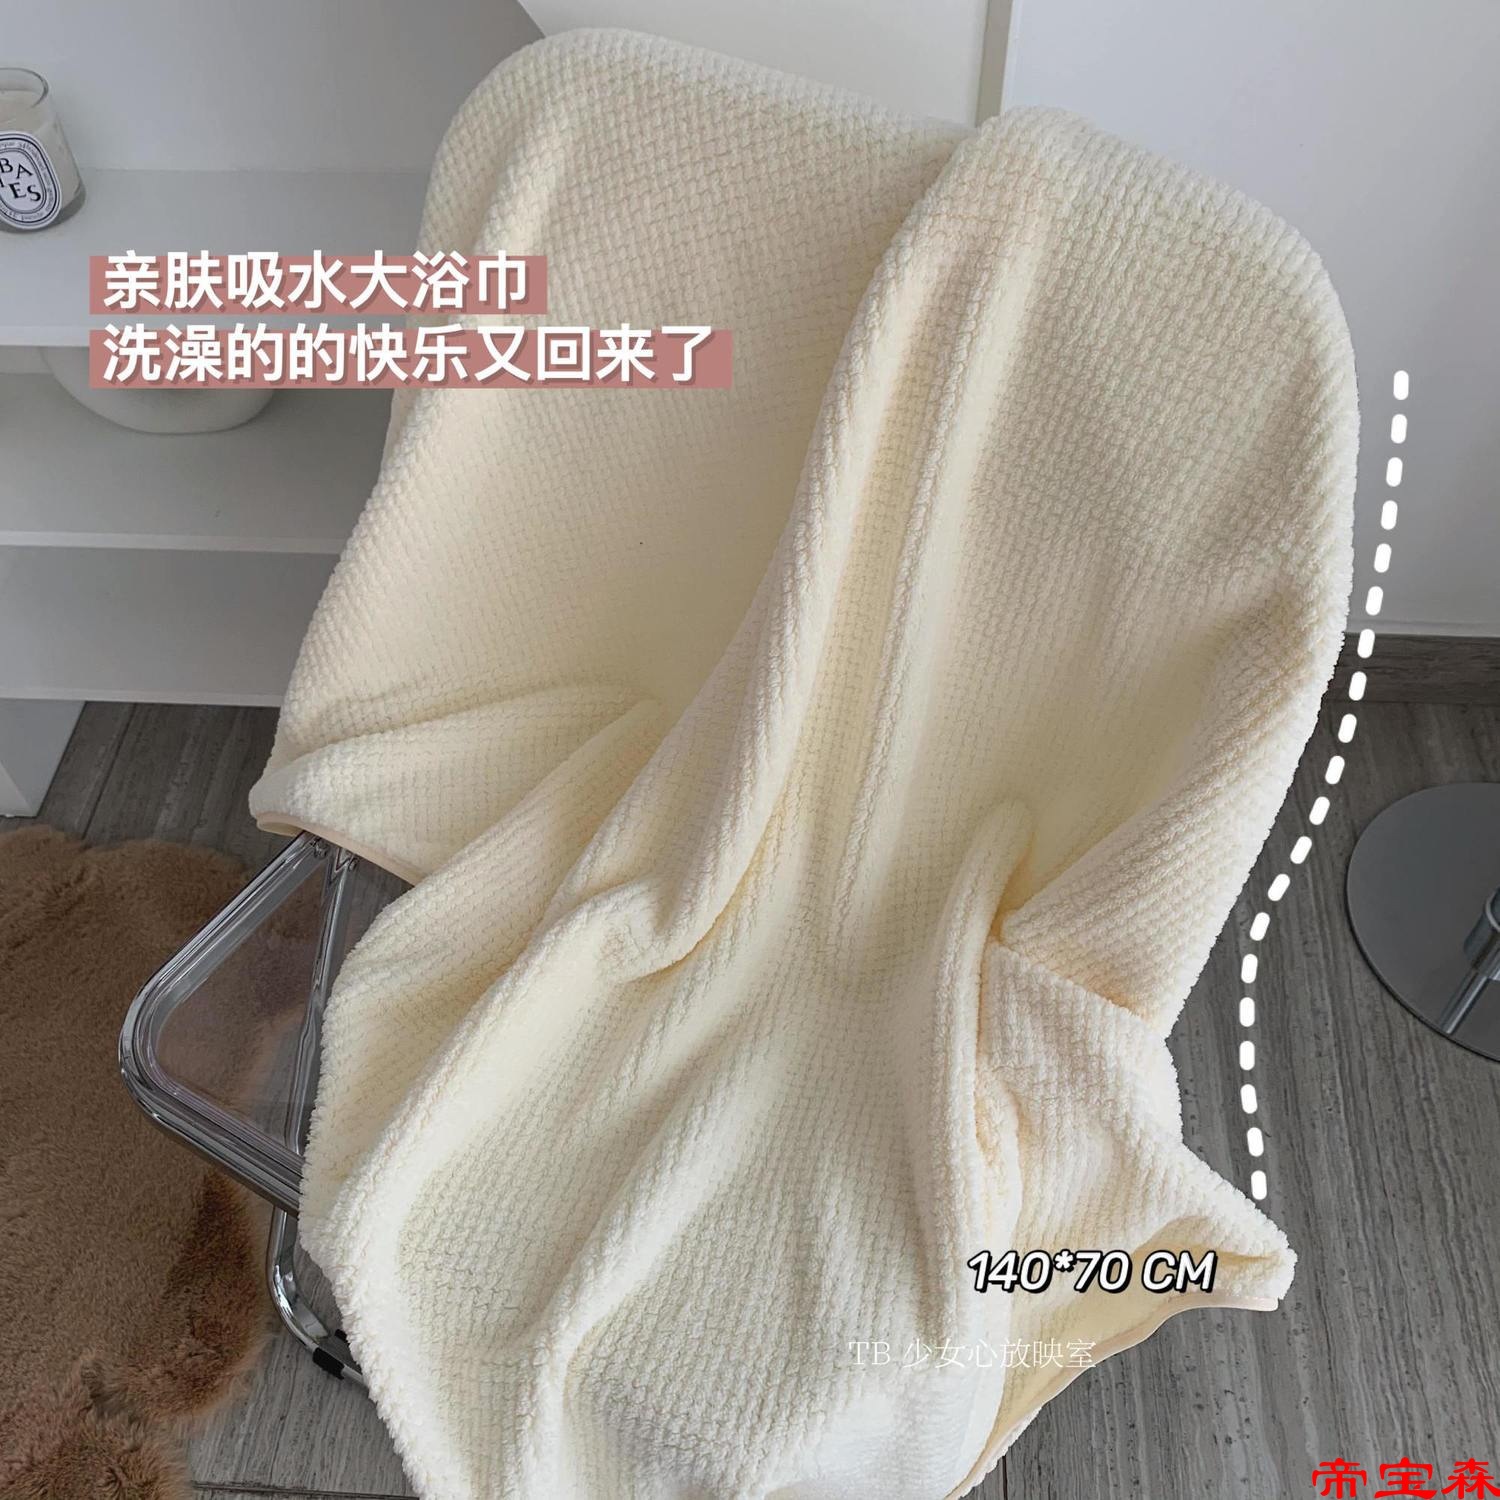 Staffing a~soft water uptake Merbau Bath towel suit household Quick drying take a shower towel